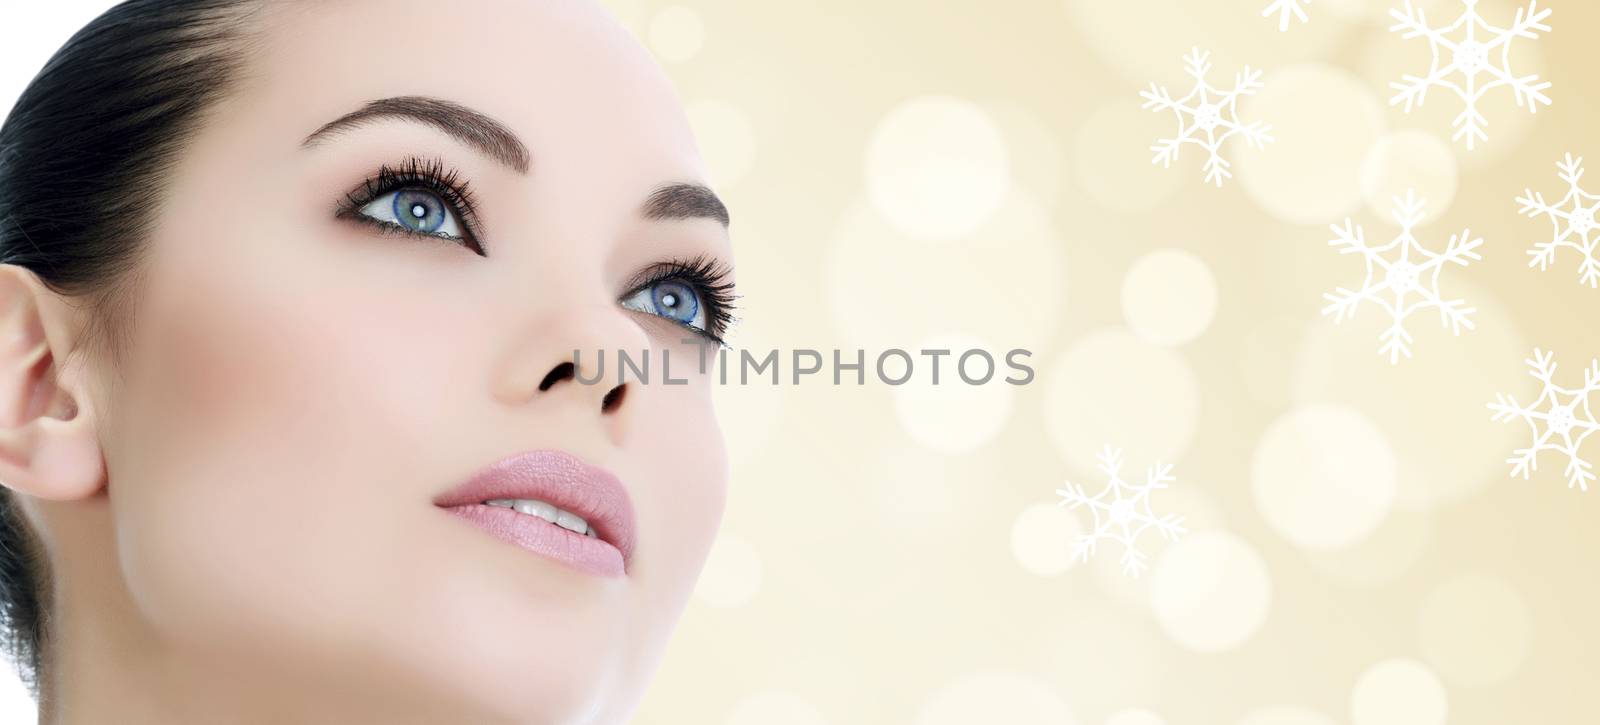 Pretty woman against an abstract background with snowflakes by Nobilior